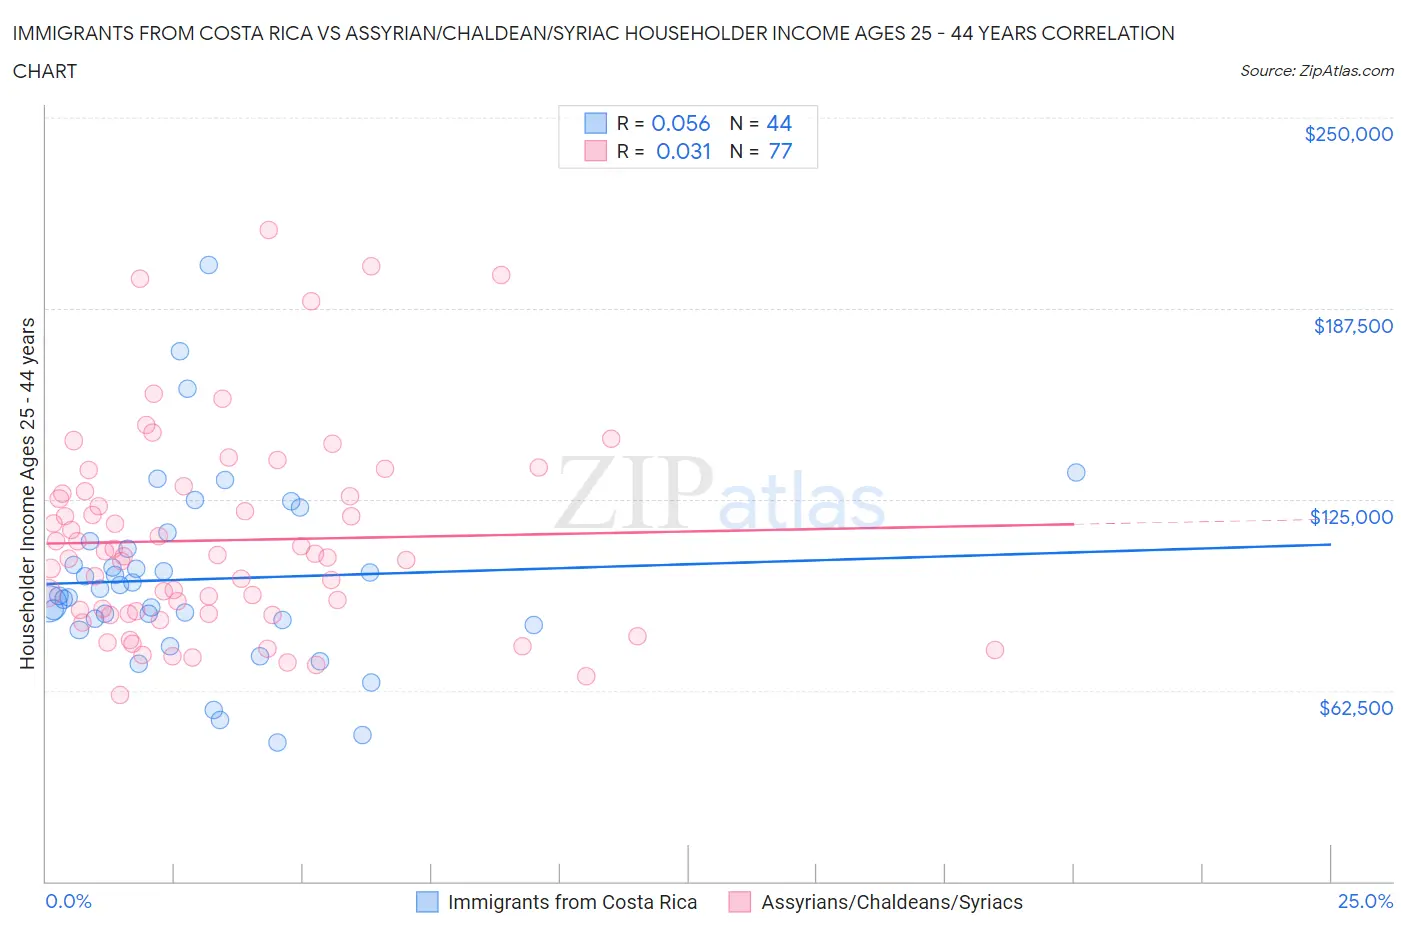 Immigrants from Costa Rica vs Assyrian/Chaldean/Syriac Householder Income Ages 25 - 44 years